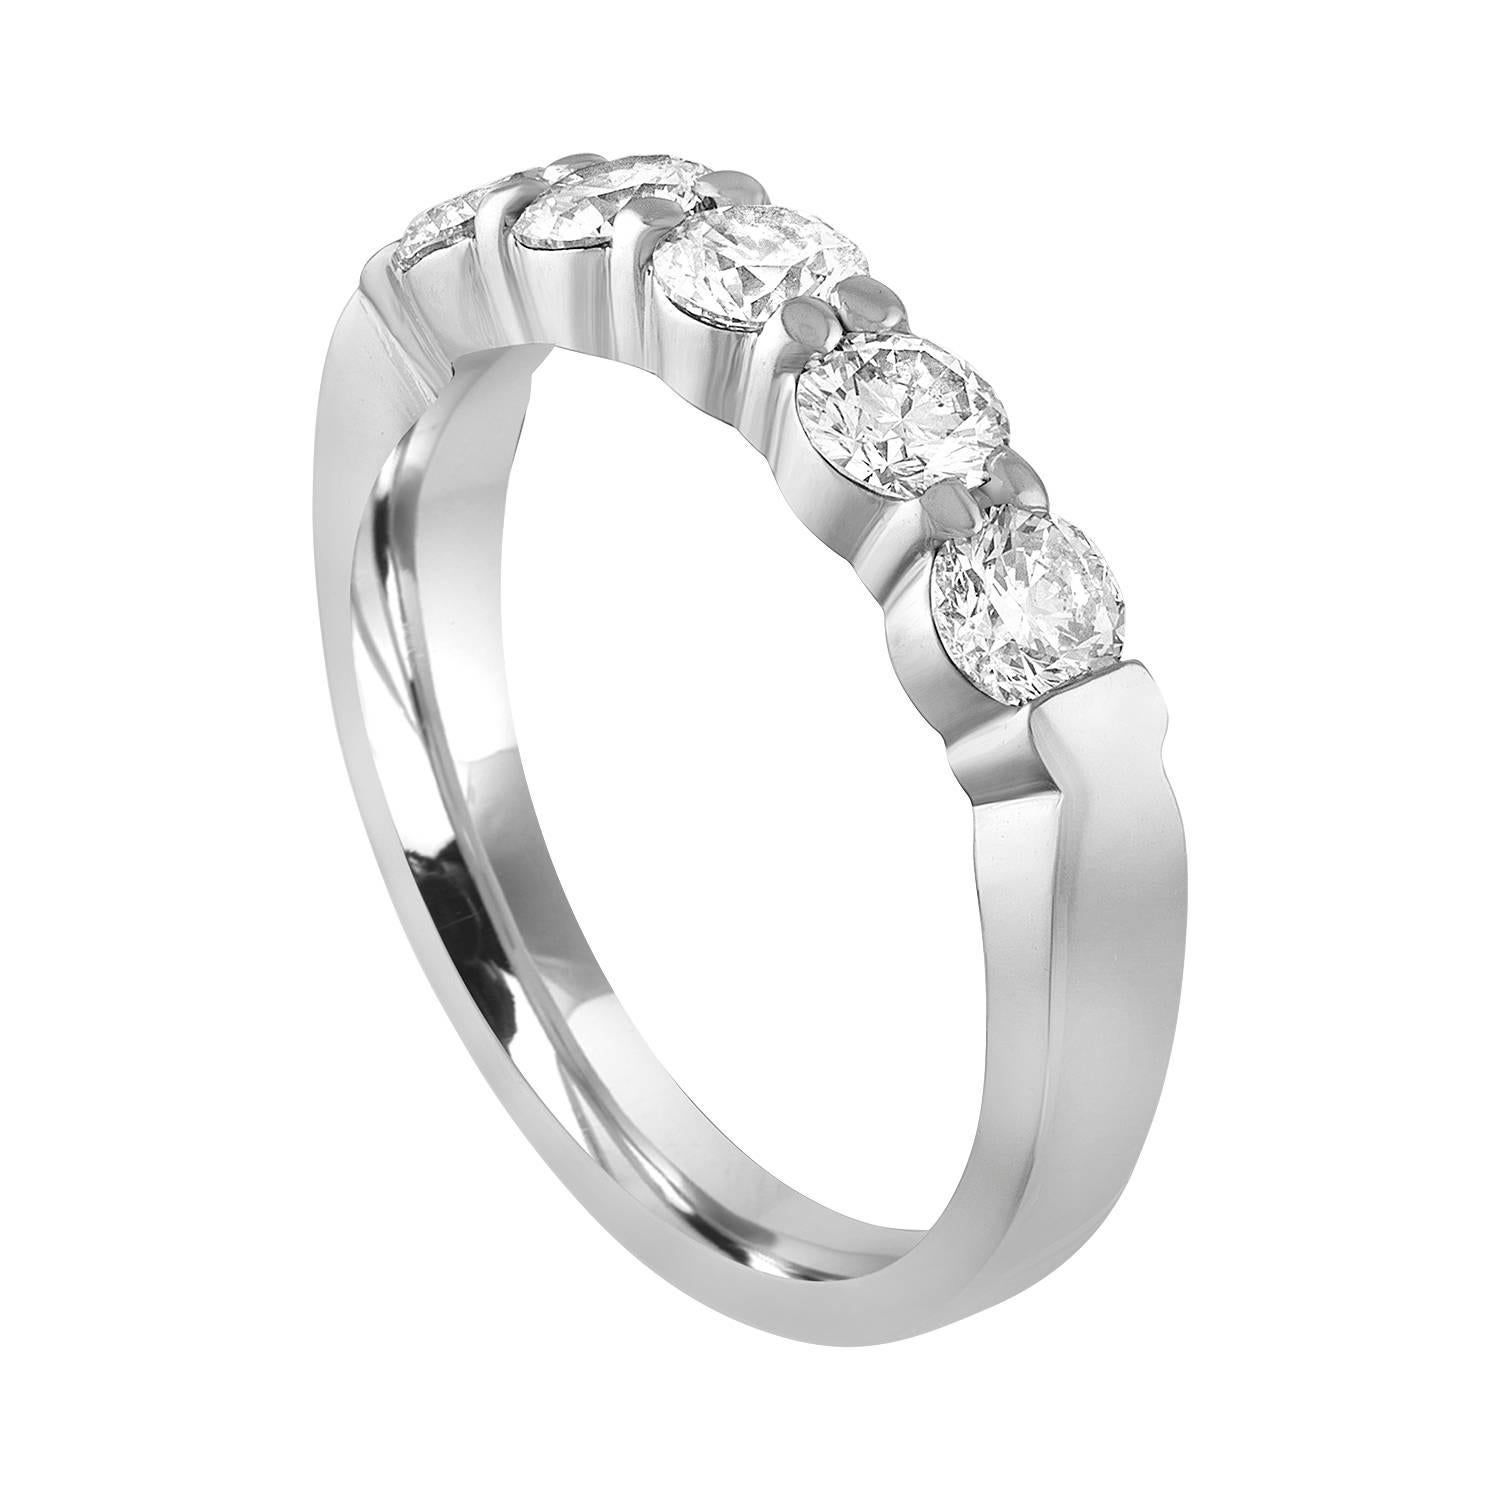 Very Beautiful Half Diamond Band Ring.
The ring is Platinum 950.
There are 5 Round Cut Diamonds prong set.
There is 1.00 Carat In Diamonds F/G VS.
The ring is a size 5, sizable. 
The band is 3.74 mm wide and tapers down to 2.39 mm.
The ring weighs